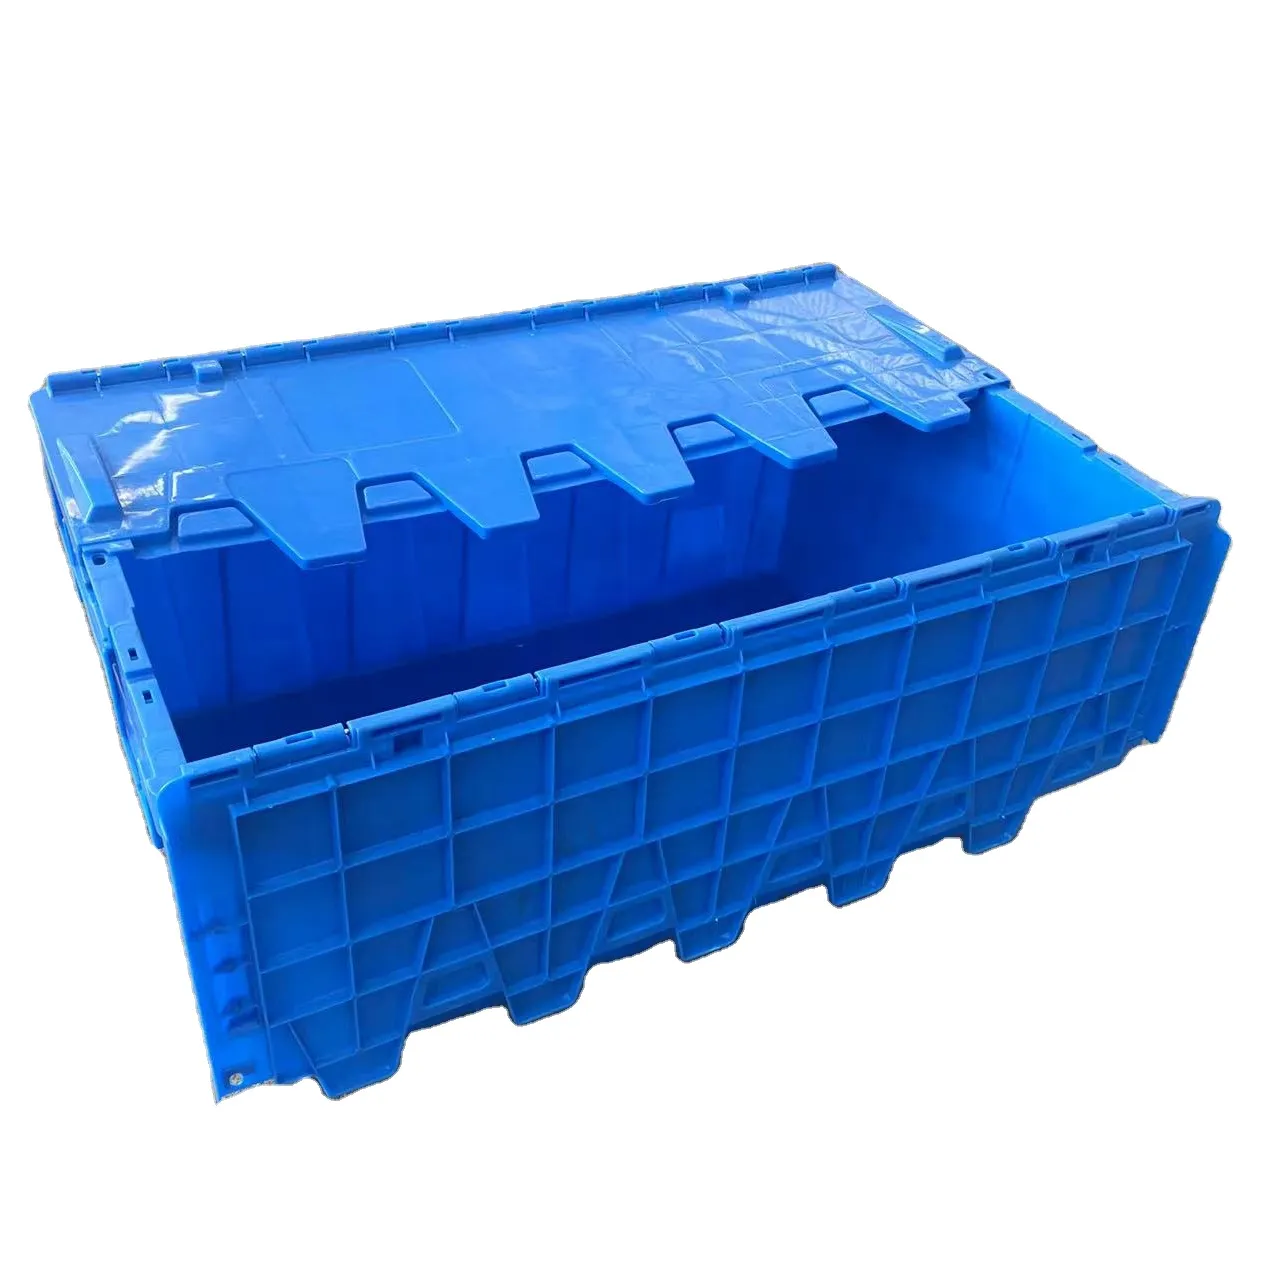 Heavy Duty Logistic Turnover stackable plastic tote boxes Crates storage container moving crate with Hinged Lids